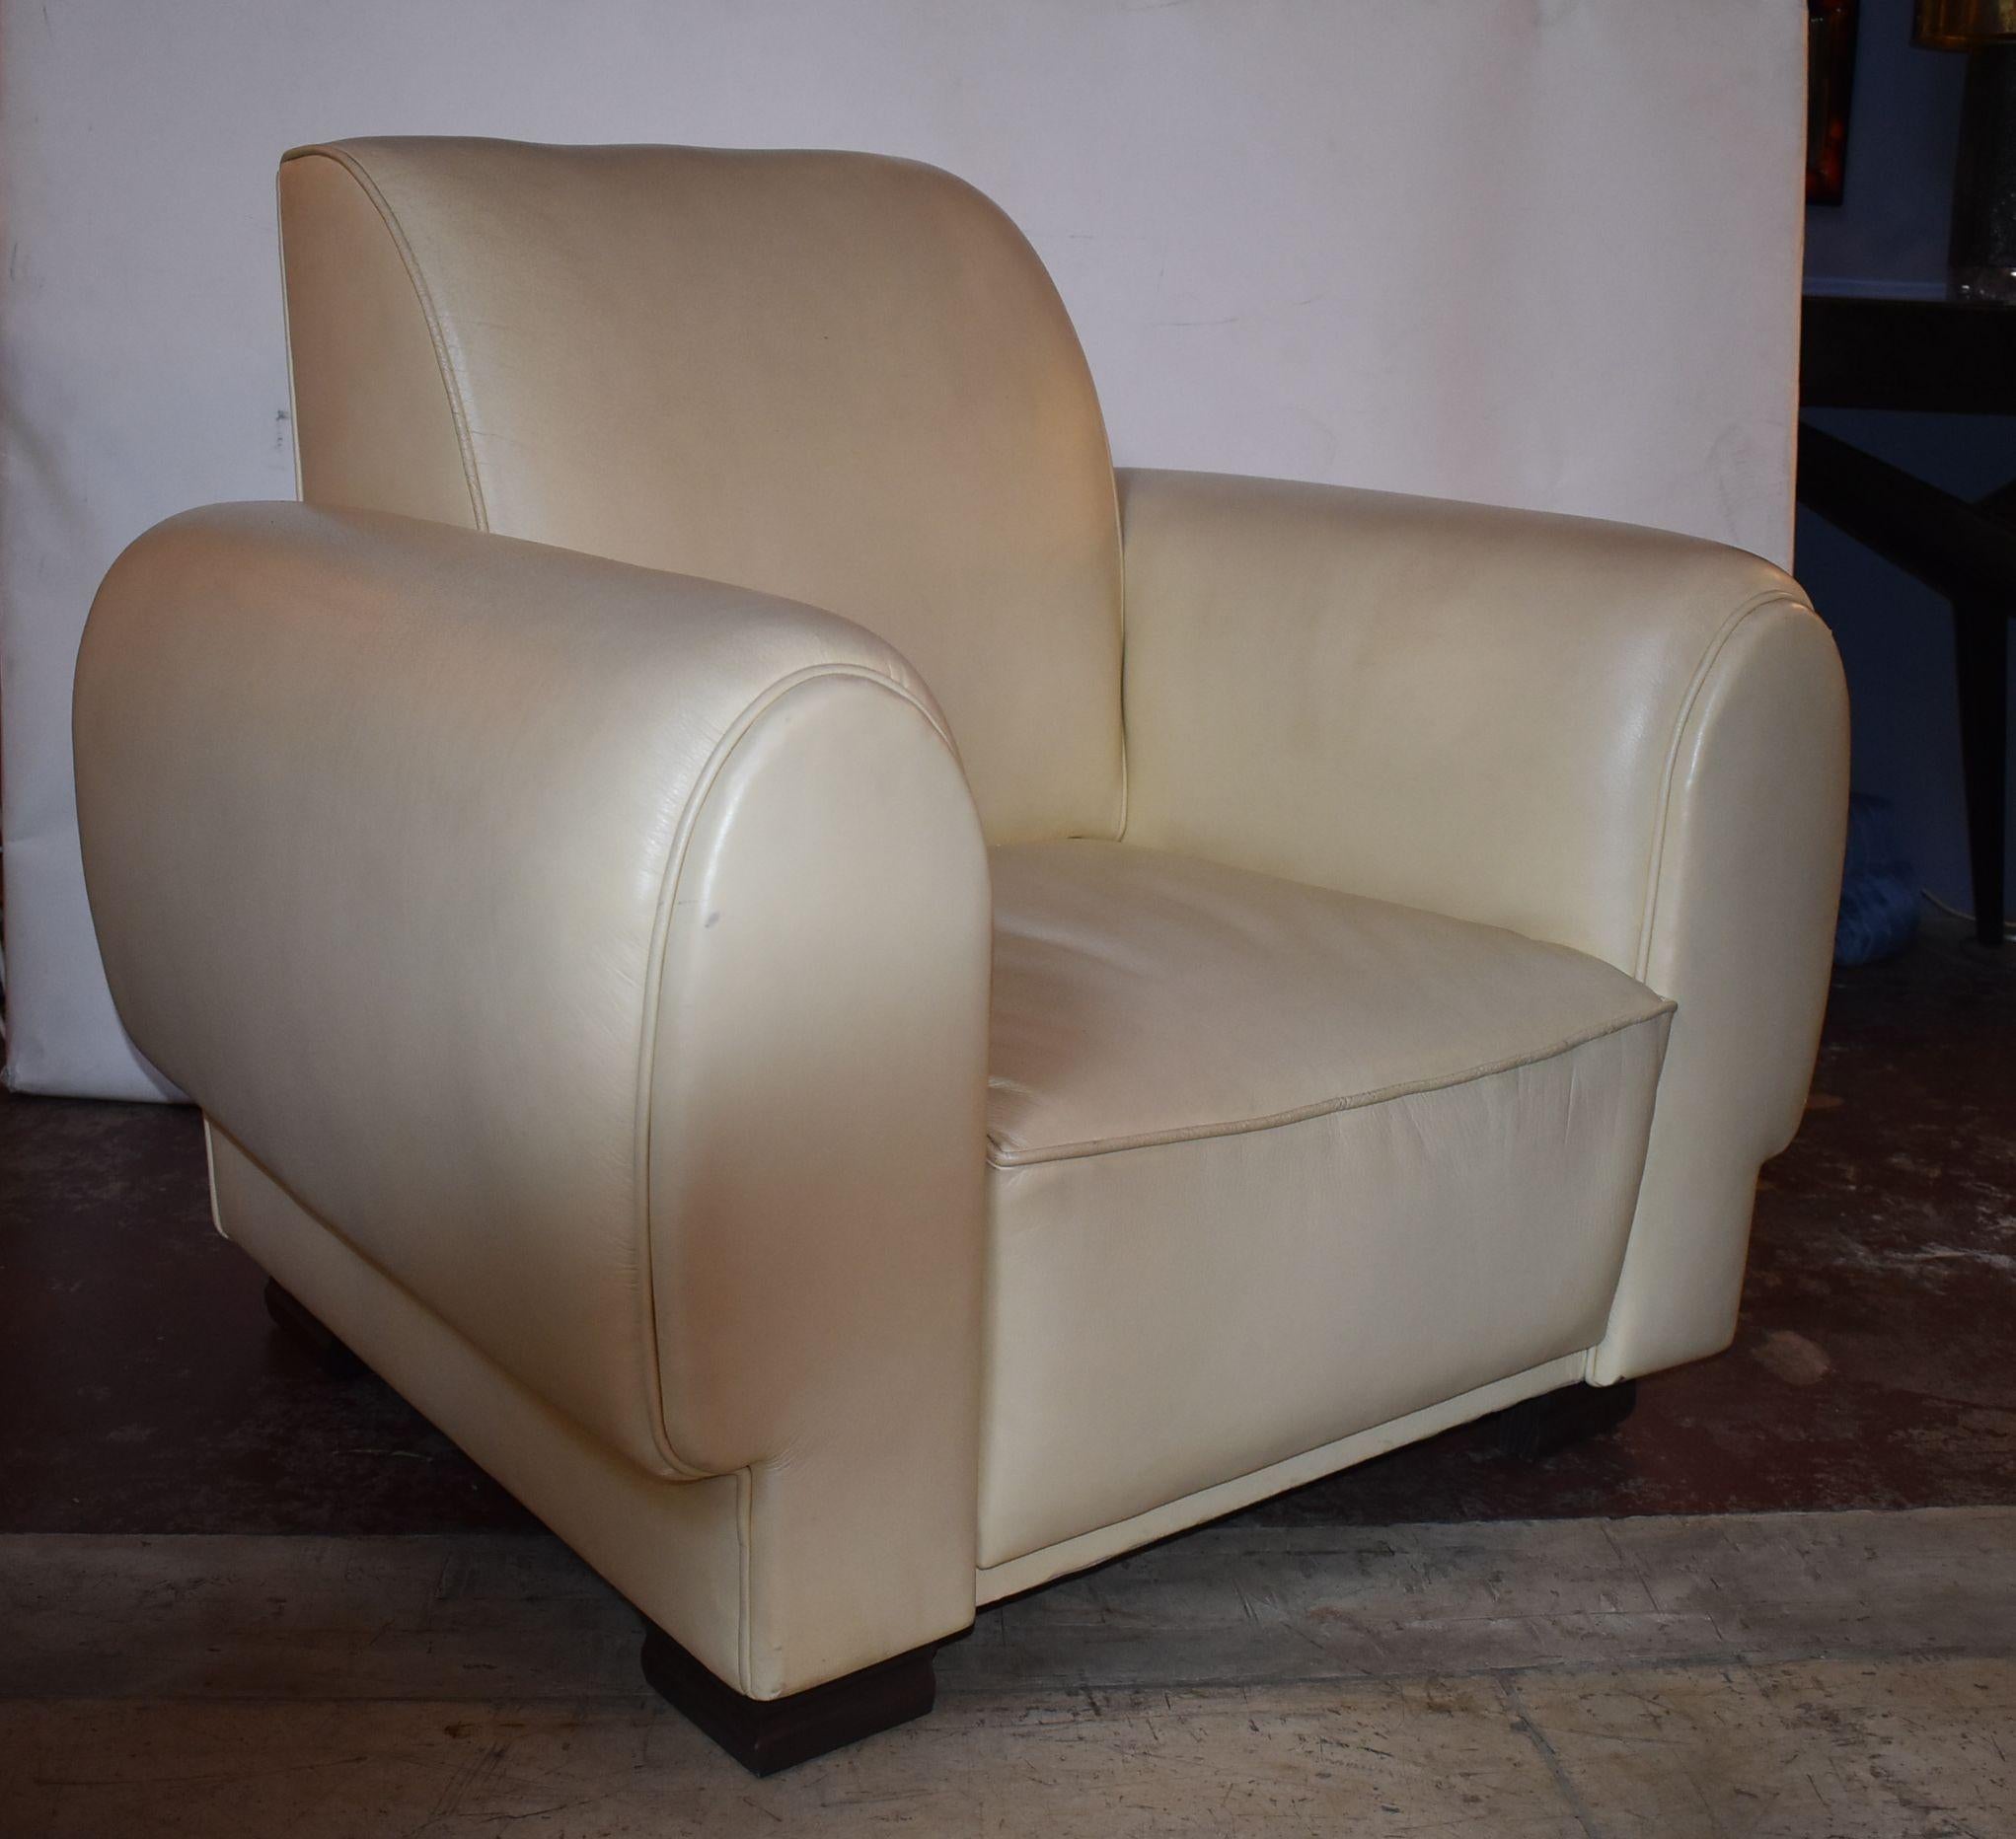 A fabulous pair of vintage French large club armchairs in the style of Paul Dupre-Lafon. Upholstered in a cream leather. Frame and legs are made of oak.